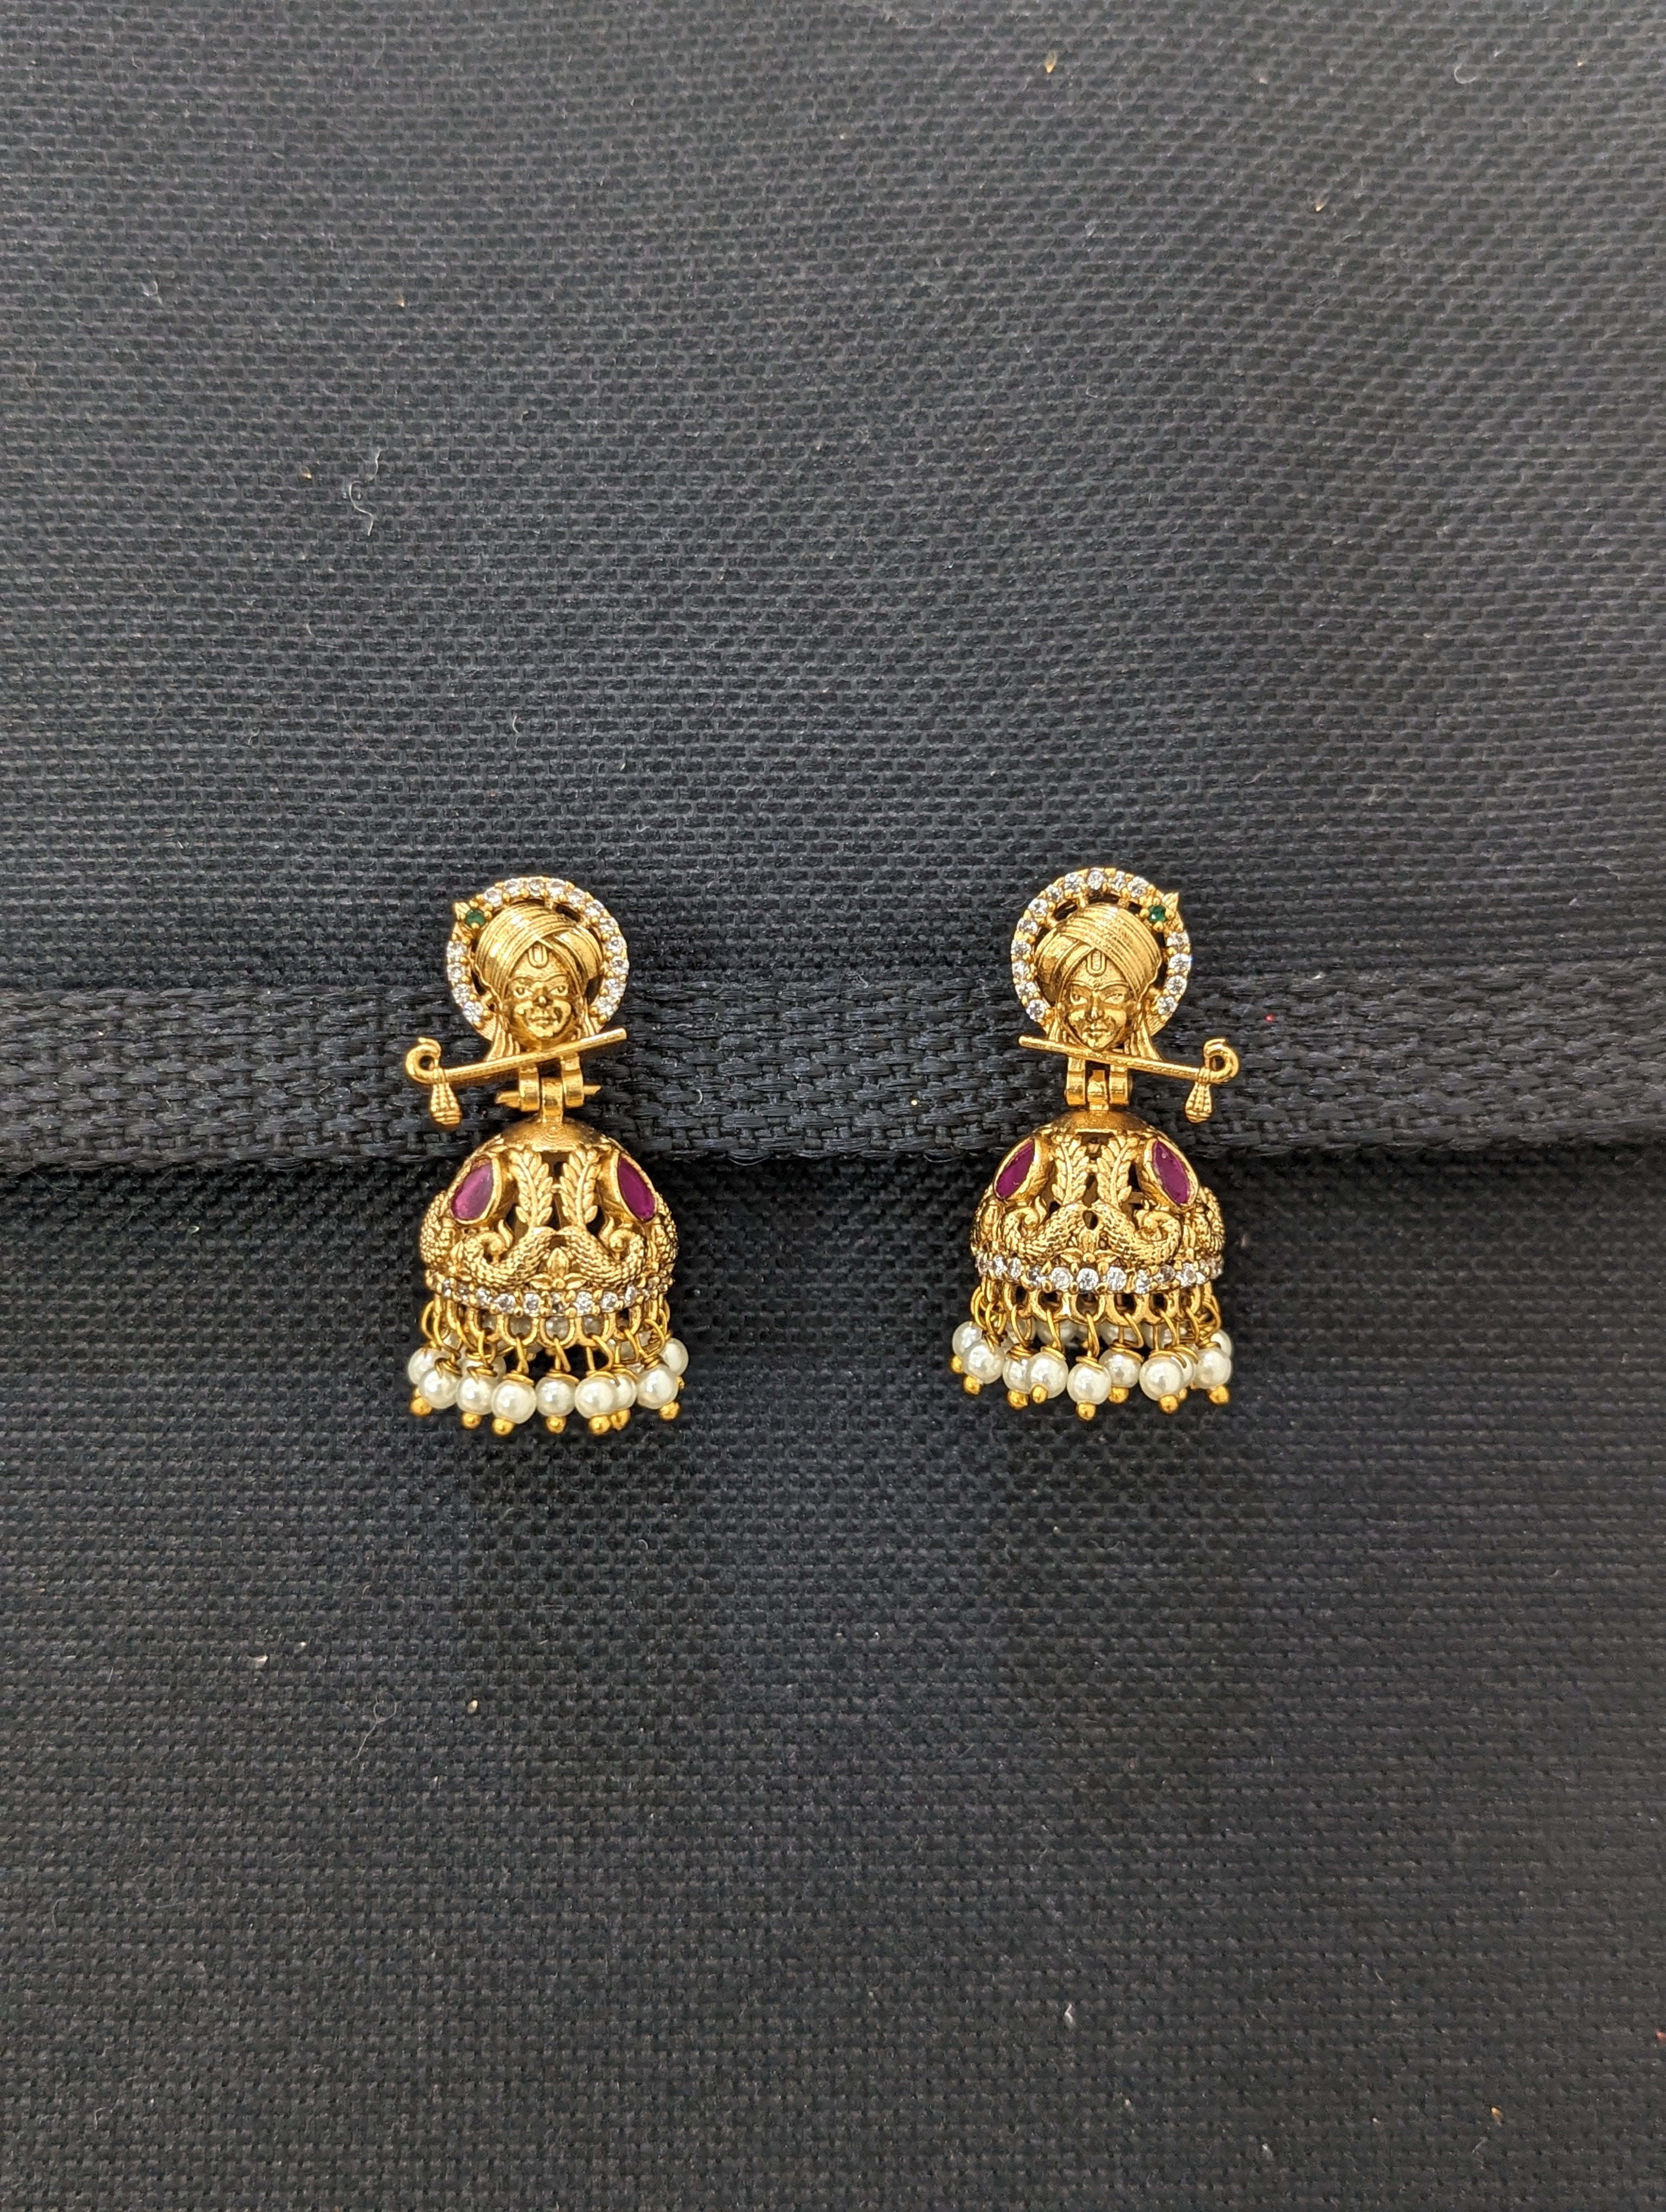 300+ Gold Earring Designs Online at Best Price - Candere by Kalyan Jewellers